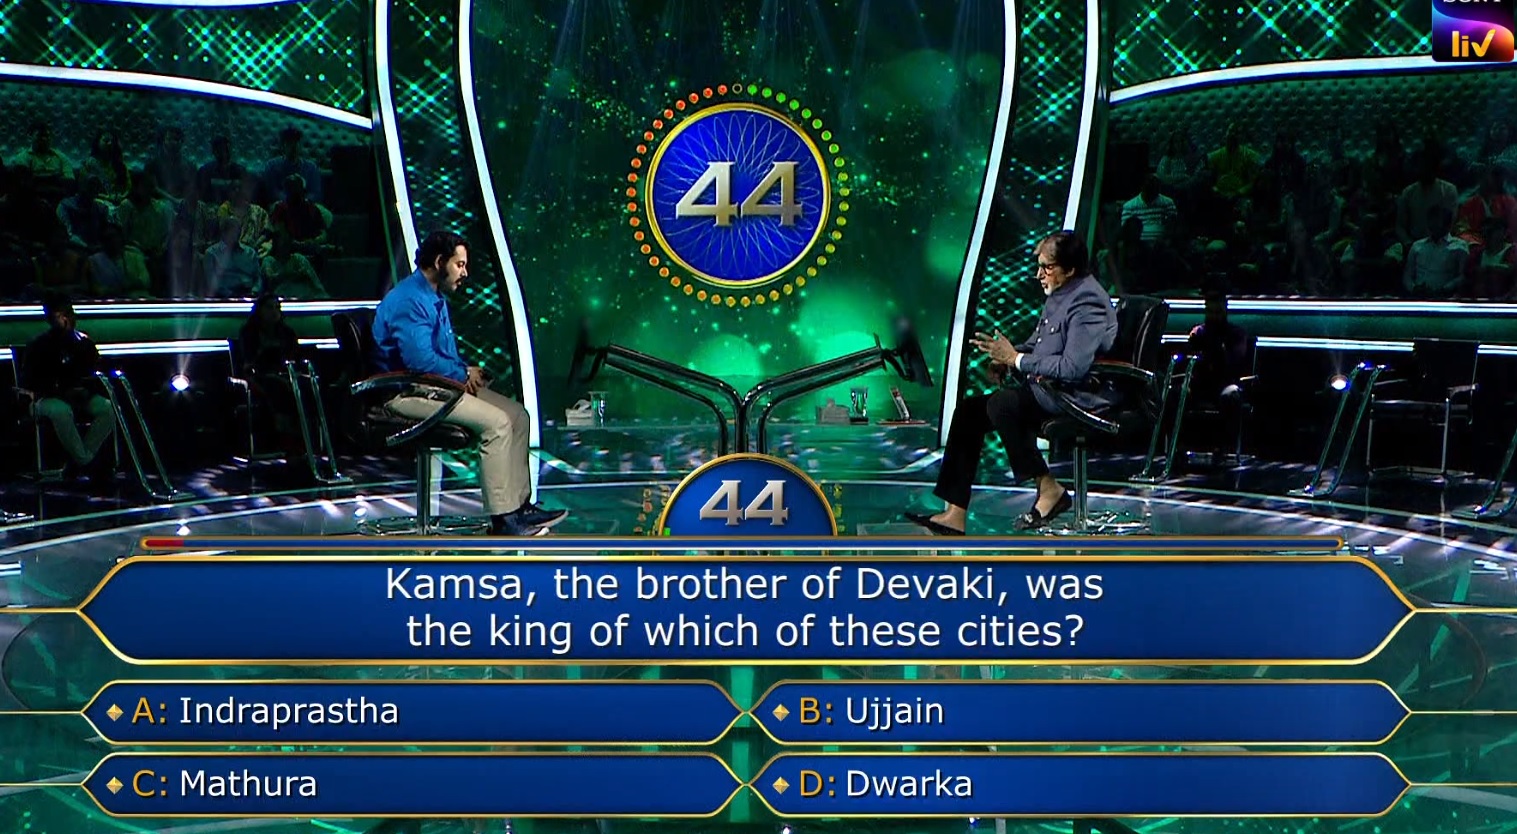 Ques : Kamsa, the brother of Devaki, was the king of which of these cities?